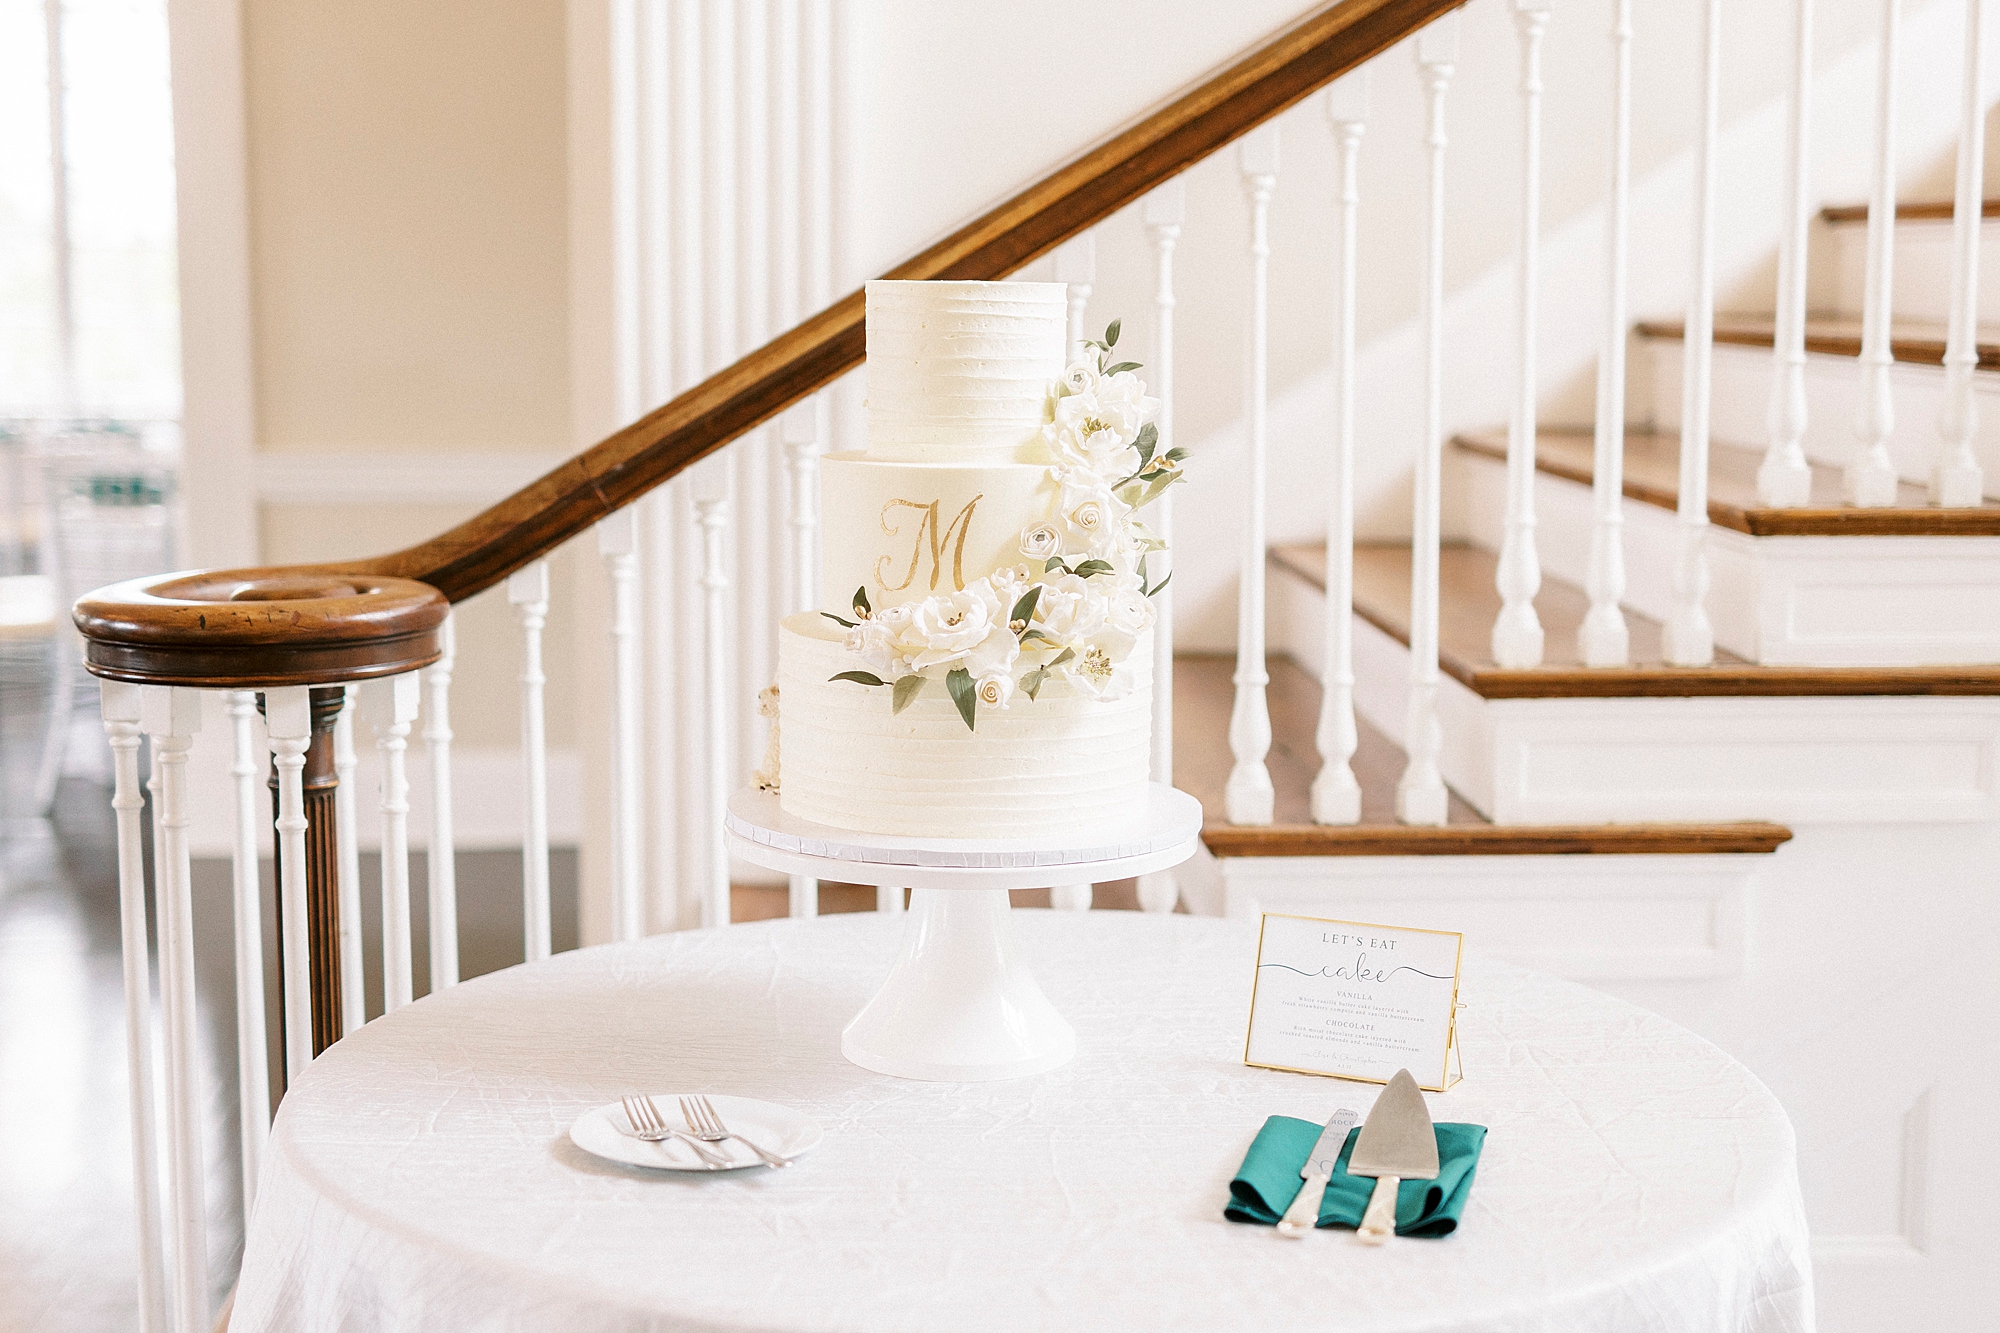 tiered wedding cake sits on table by staircase at Separk Mansion